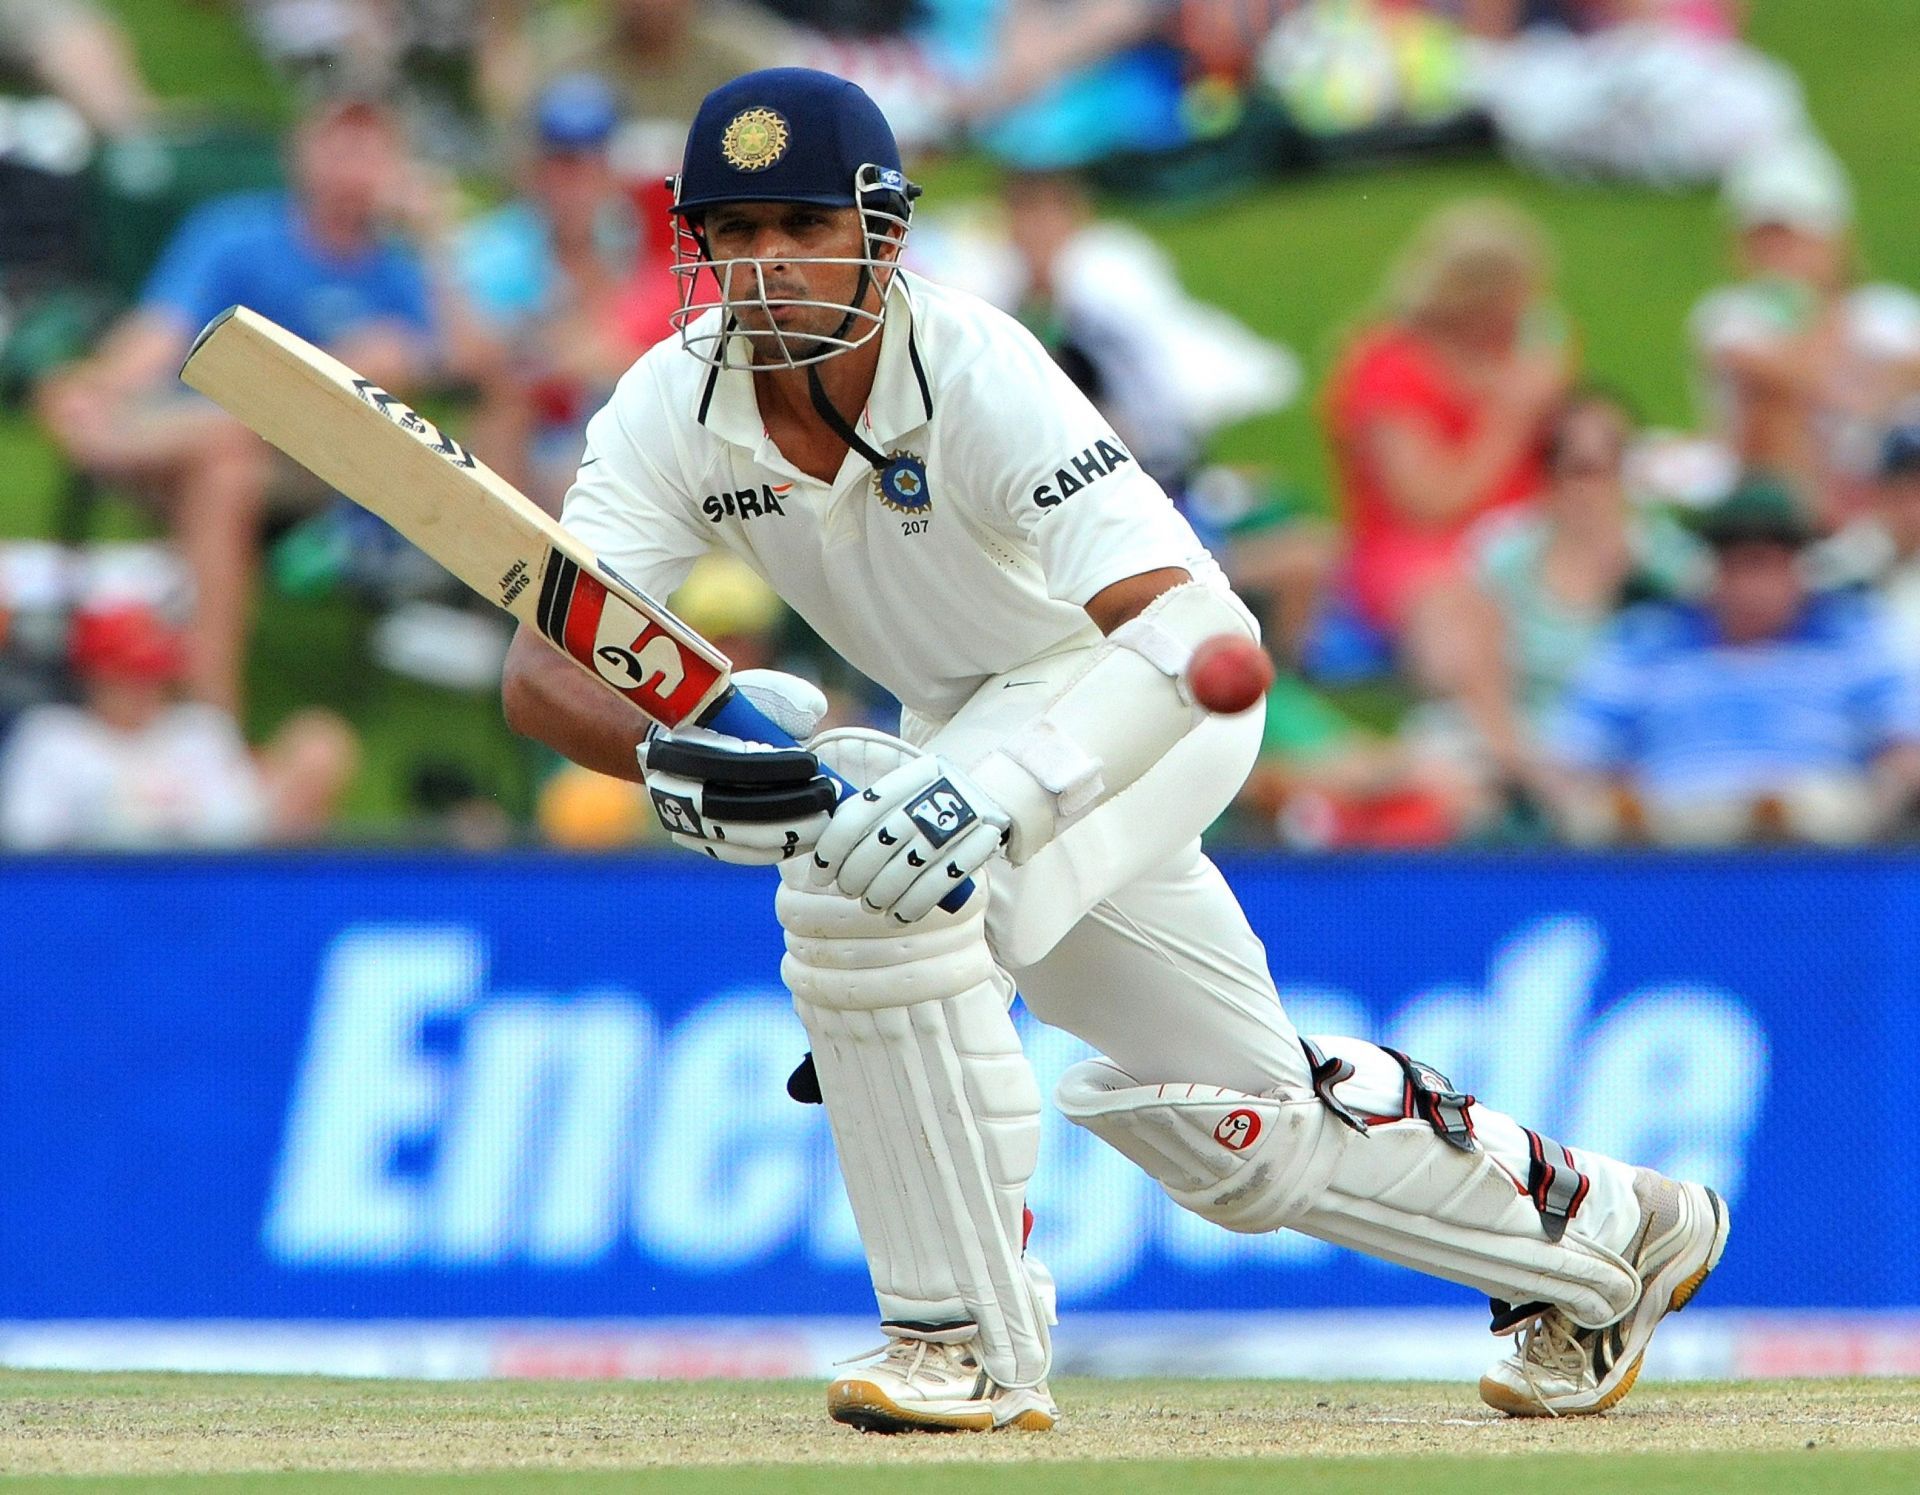 Rahul Dravid batting during the Centurion Test. Pic: Getty Images